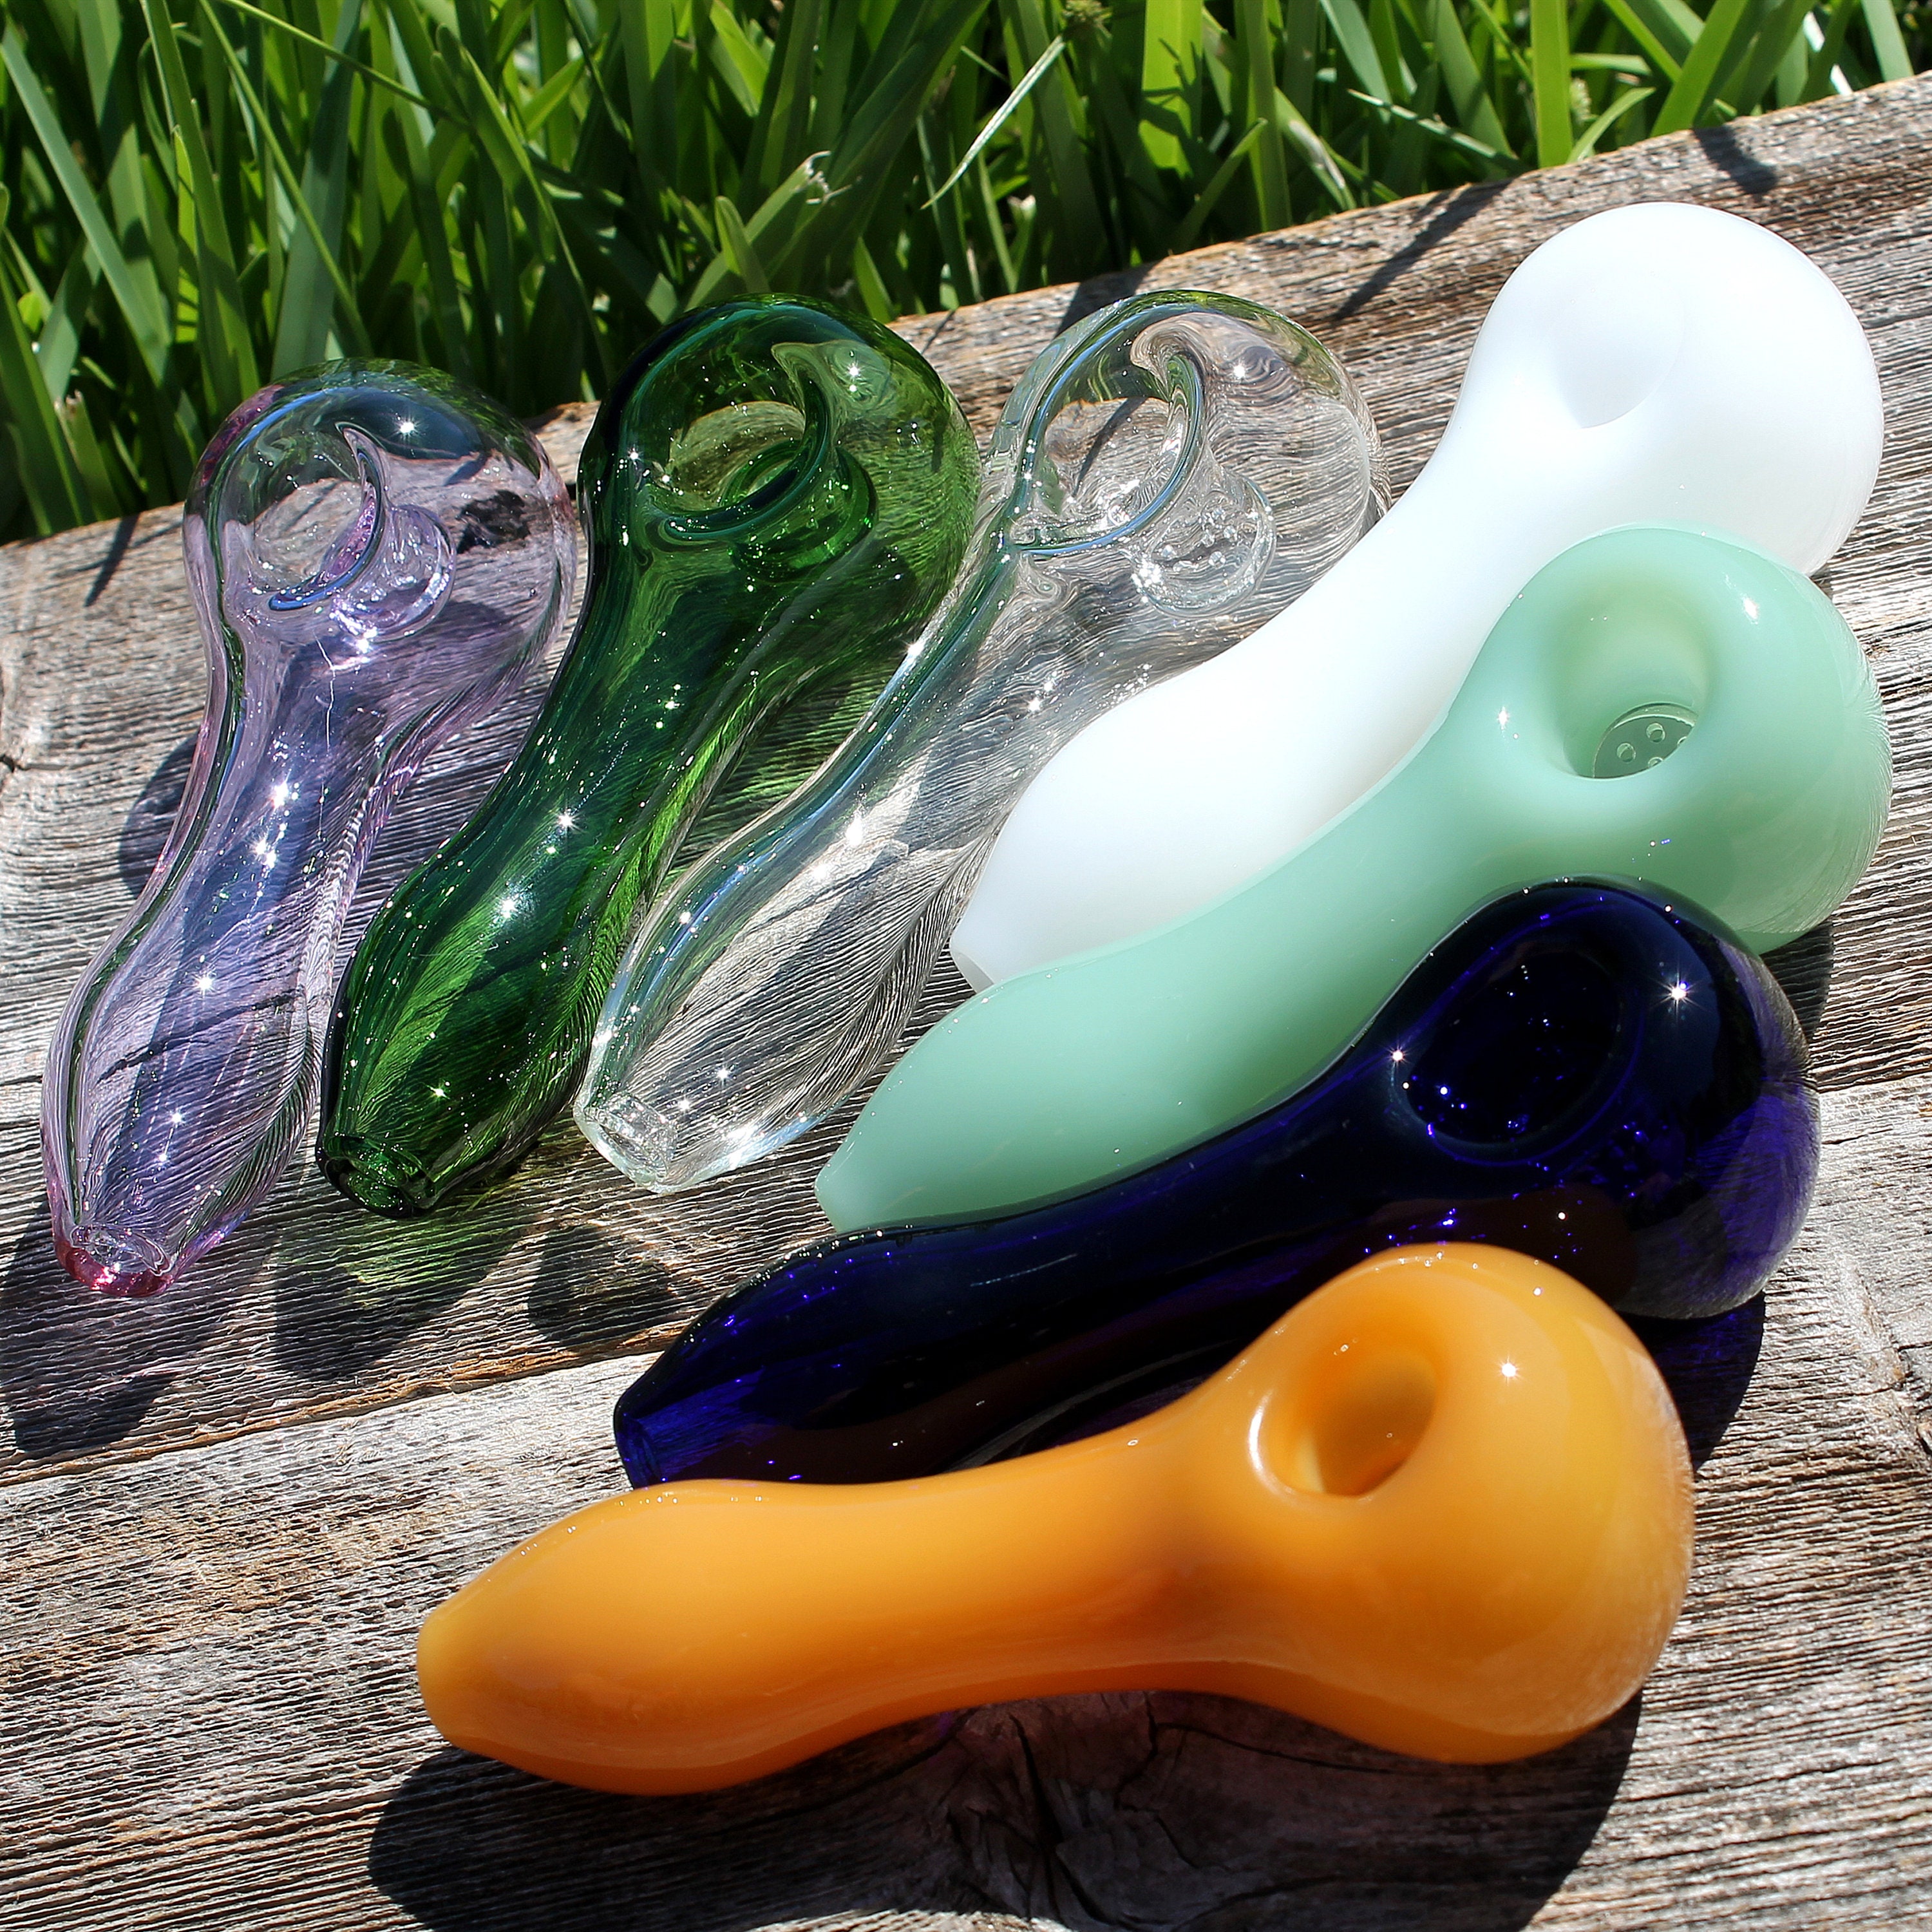 Pipes Jet Black Silicon Smoking Glass Bowl Pipe for Weed